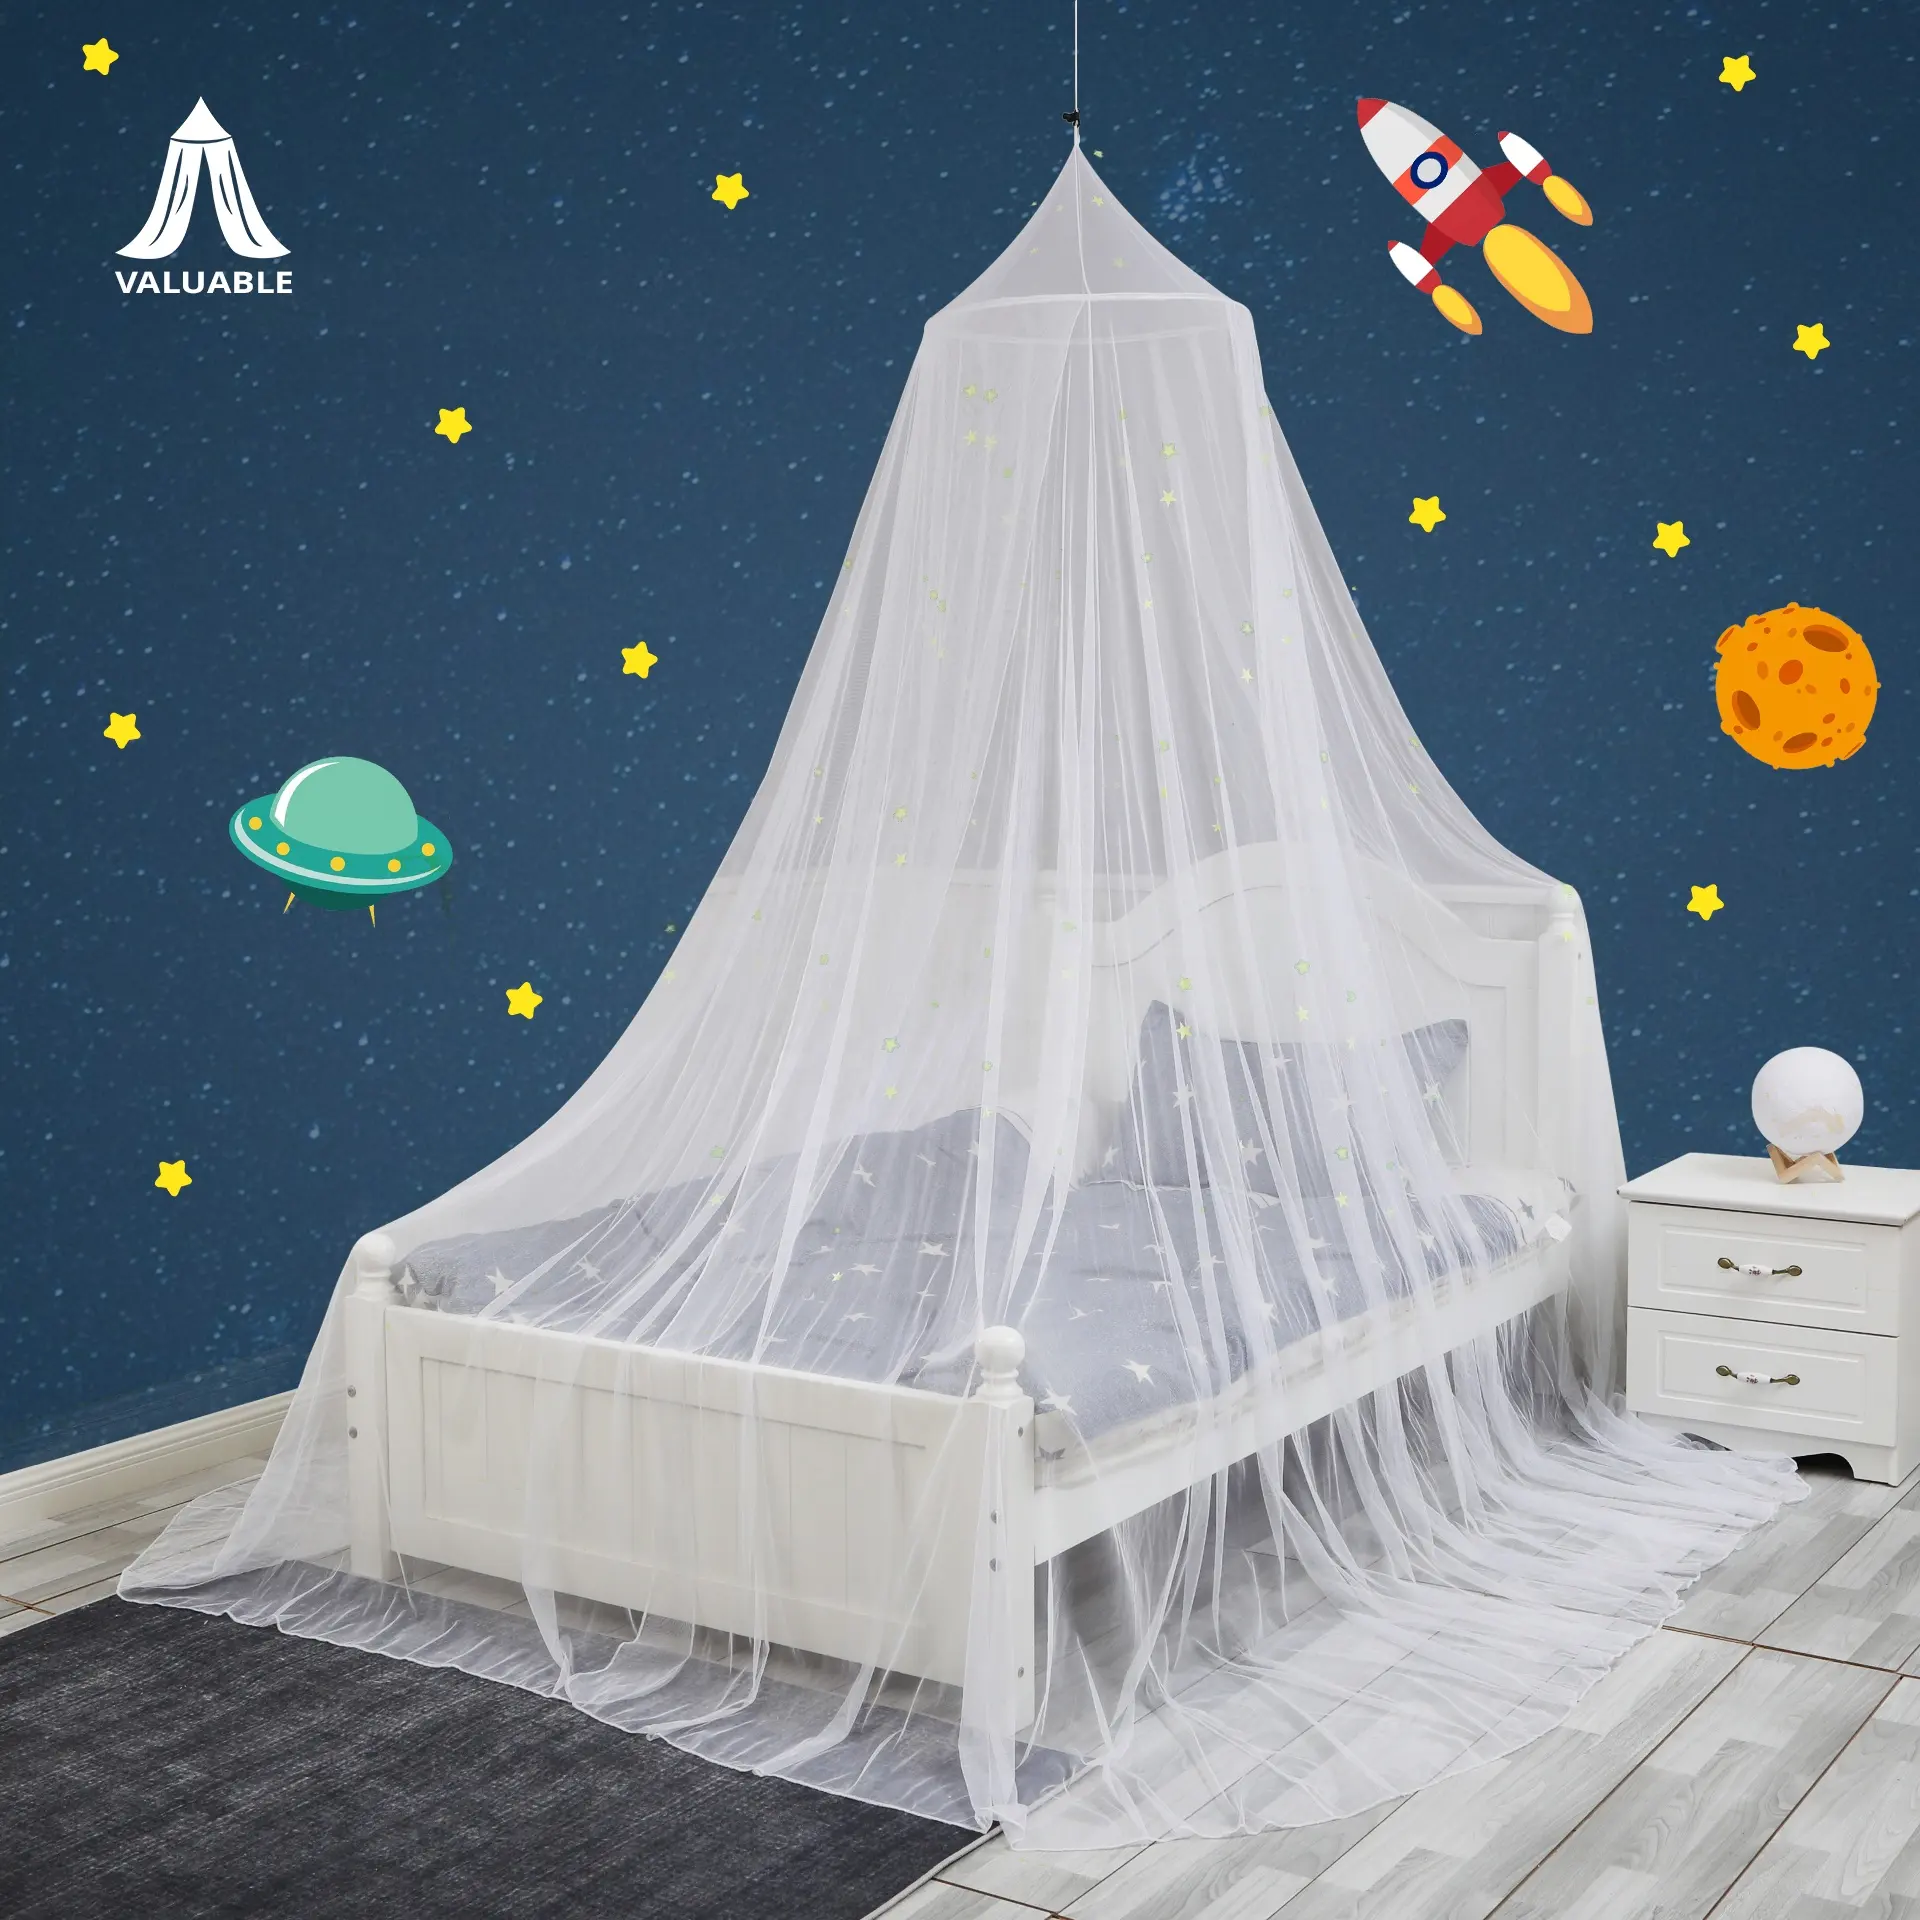 Fluorescent Stars Glow In Dark Canopy Bed For Baby Kids Girls Dome Bed Canopy Mosquito Net